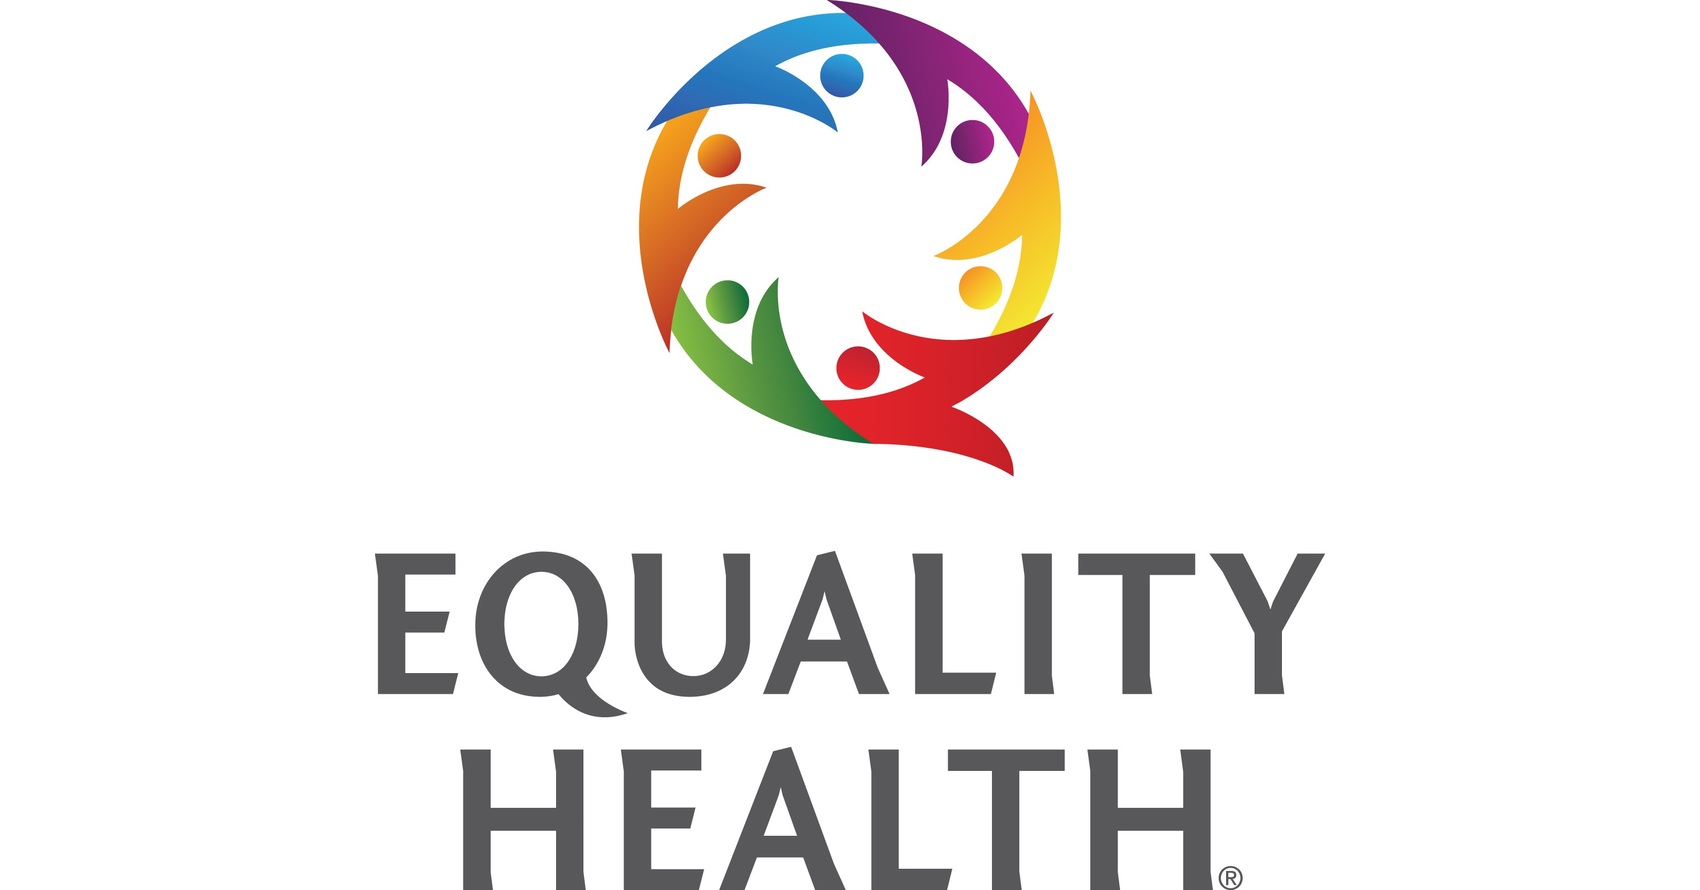 Equality Health Chief Medical Officer to Present at MGMA Leaders Conference